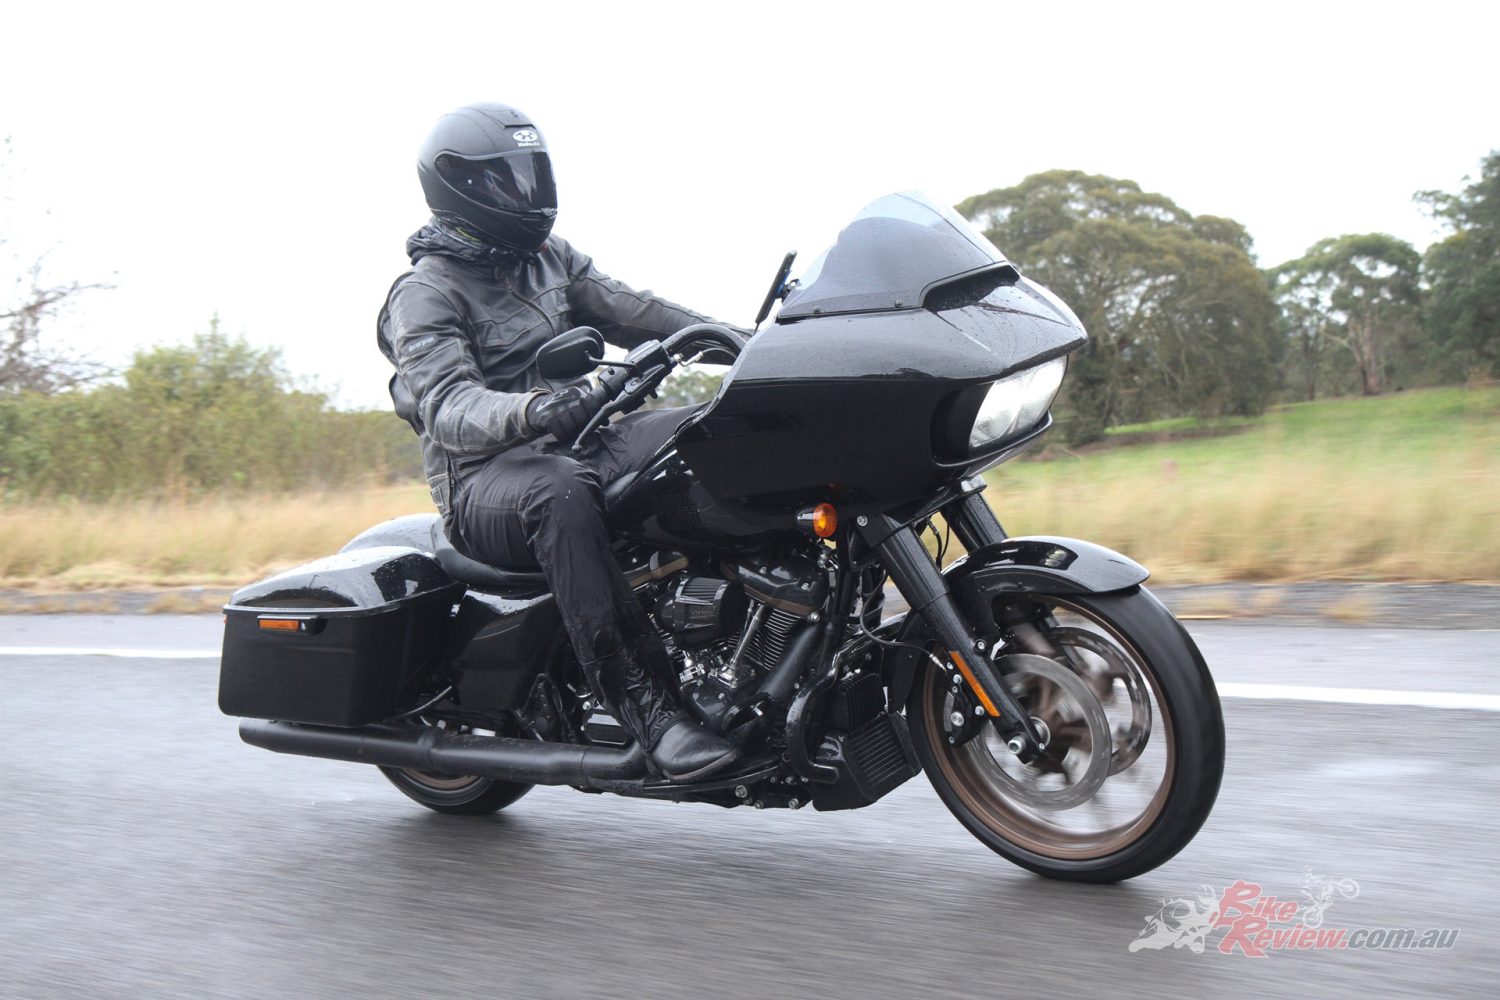 The Road Glide ST and Street Glide ST are essentially the same bike with a very styling and ergonomic differences!